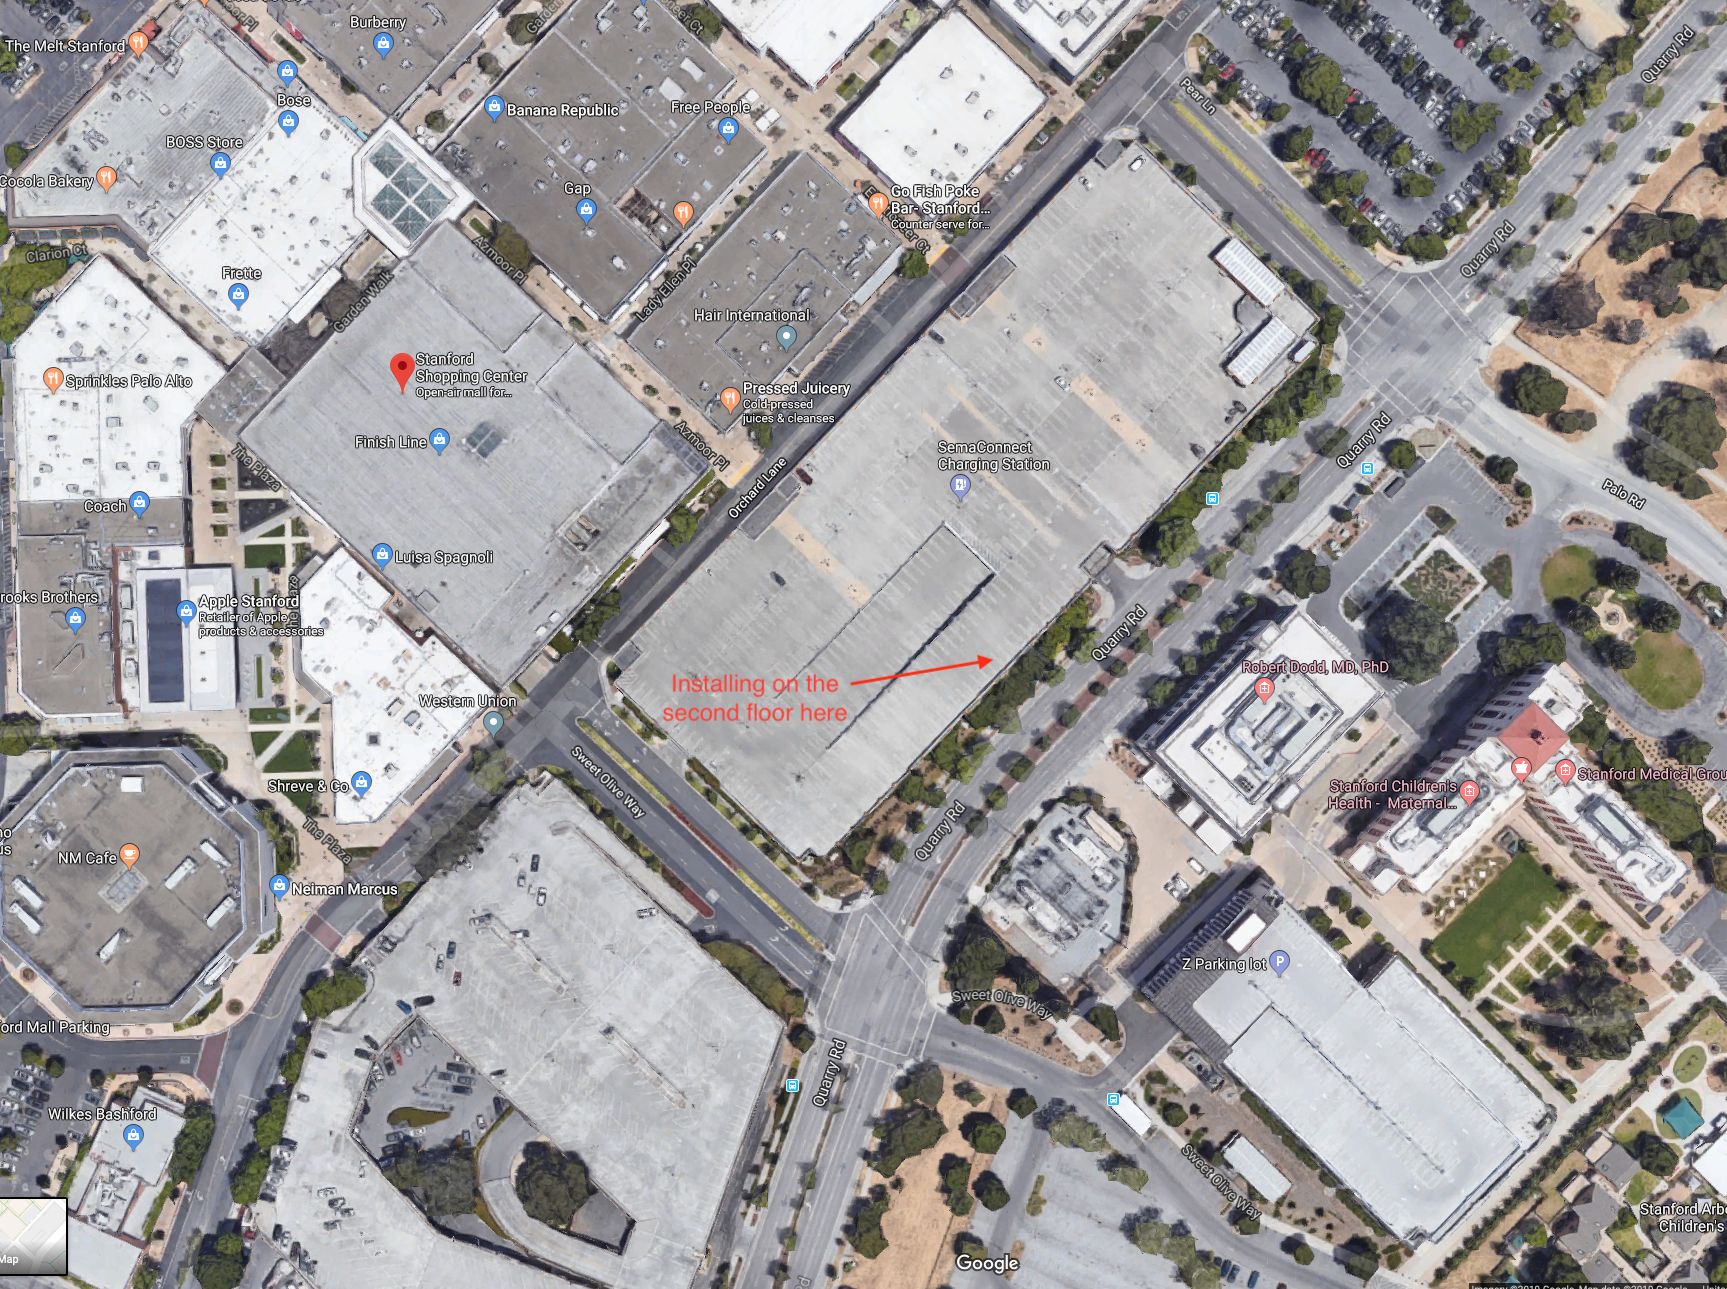 About Stanford Shopping Center - A Shopping Center in Palo Alto